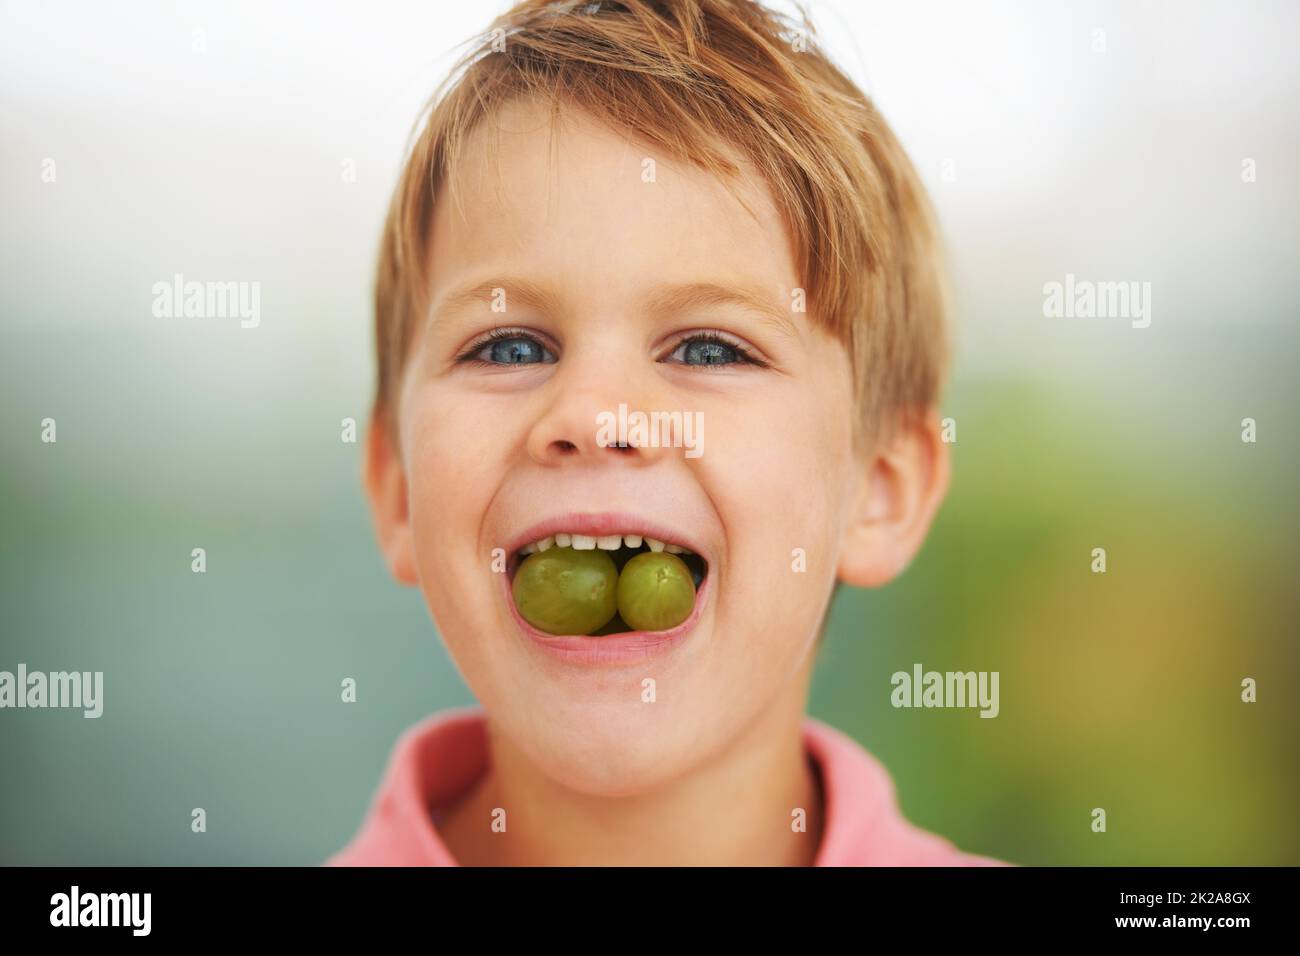 Its a mouthful of fruitiness. Shot of a boy stuffing two grapes in his mouth. Stock Photo